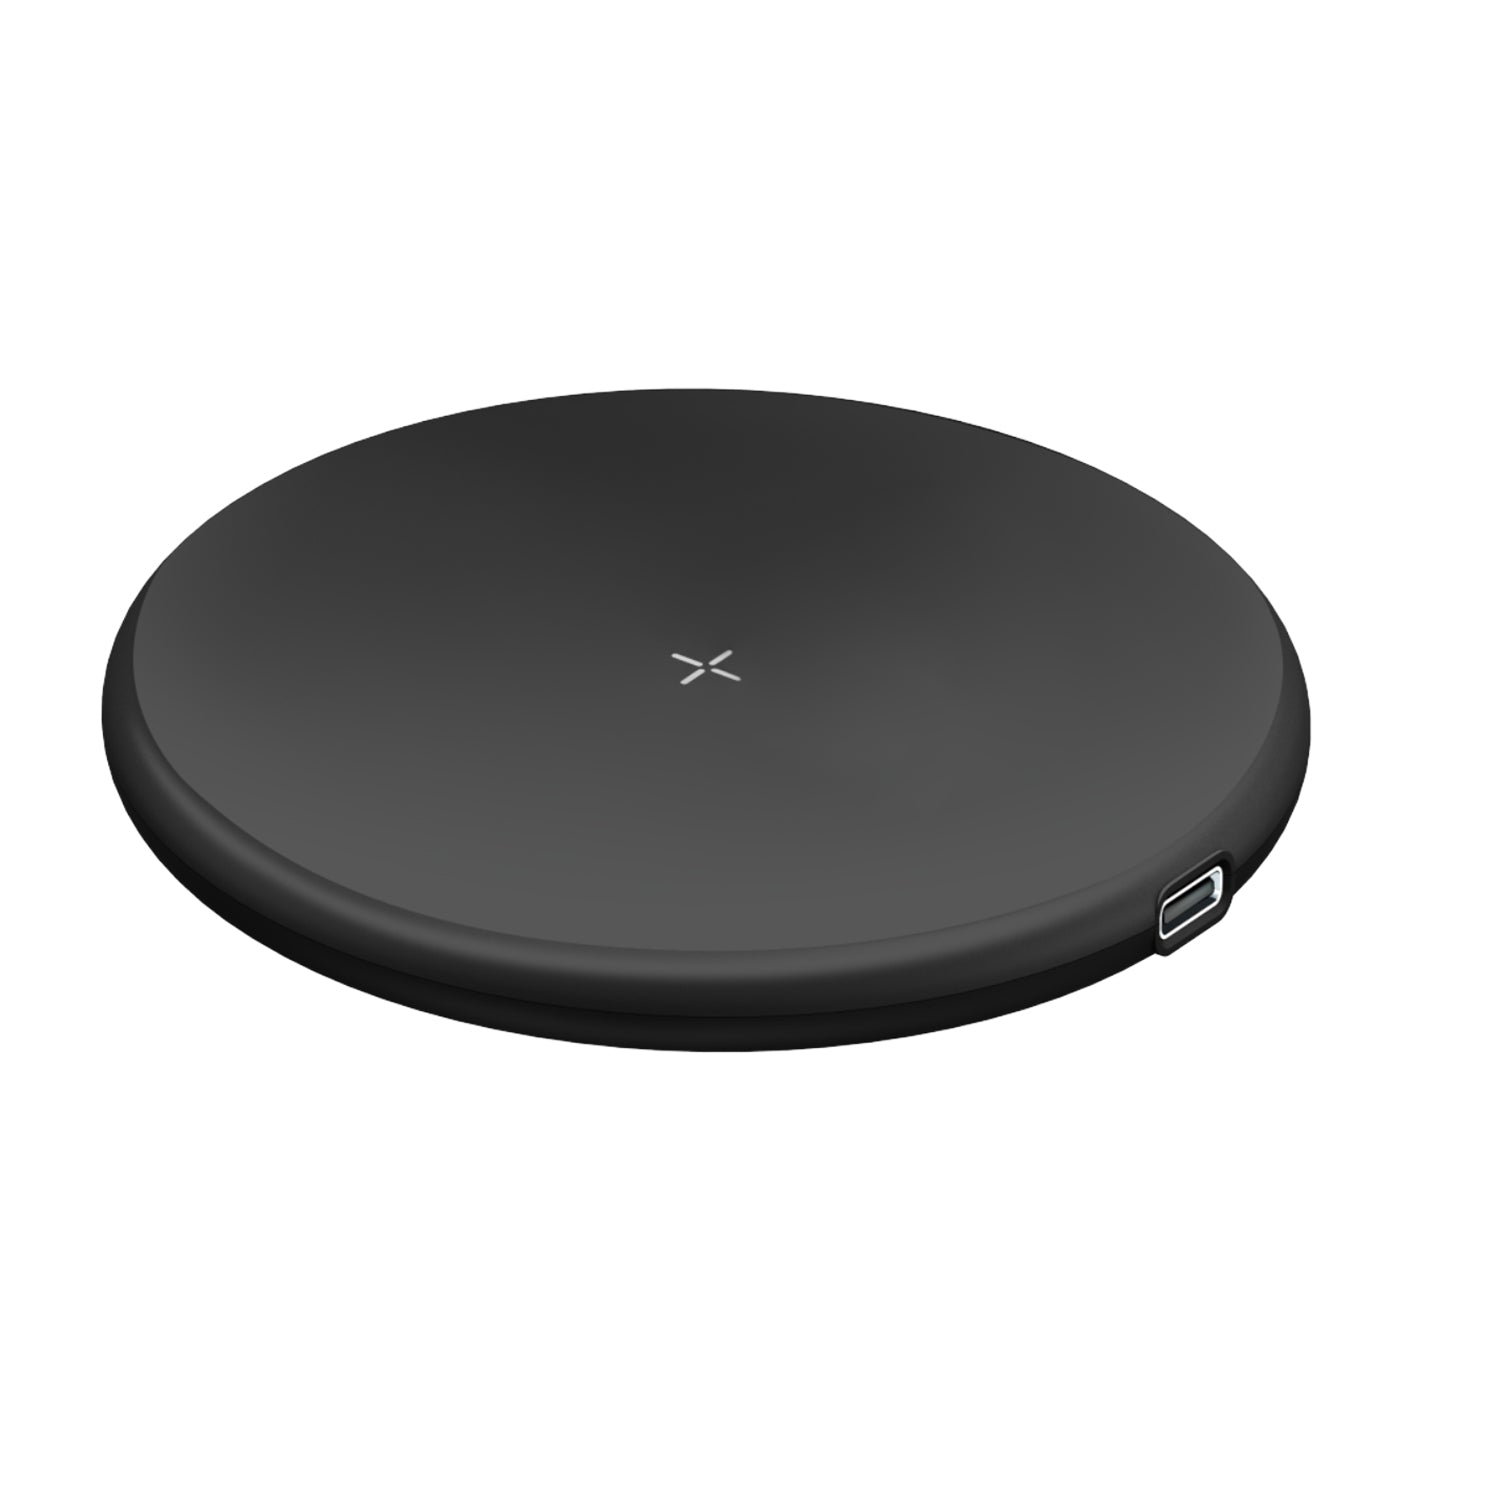 15W Max Fast Wireless Charger